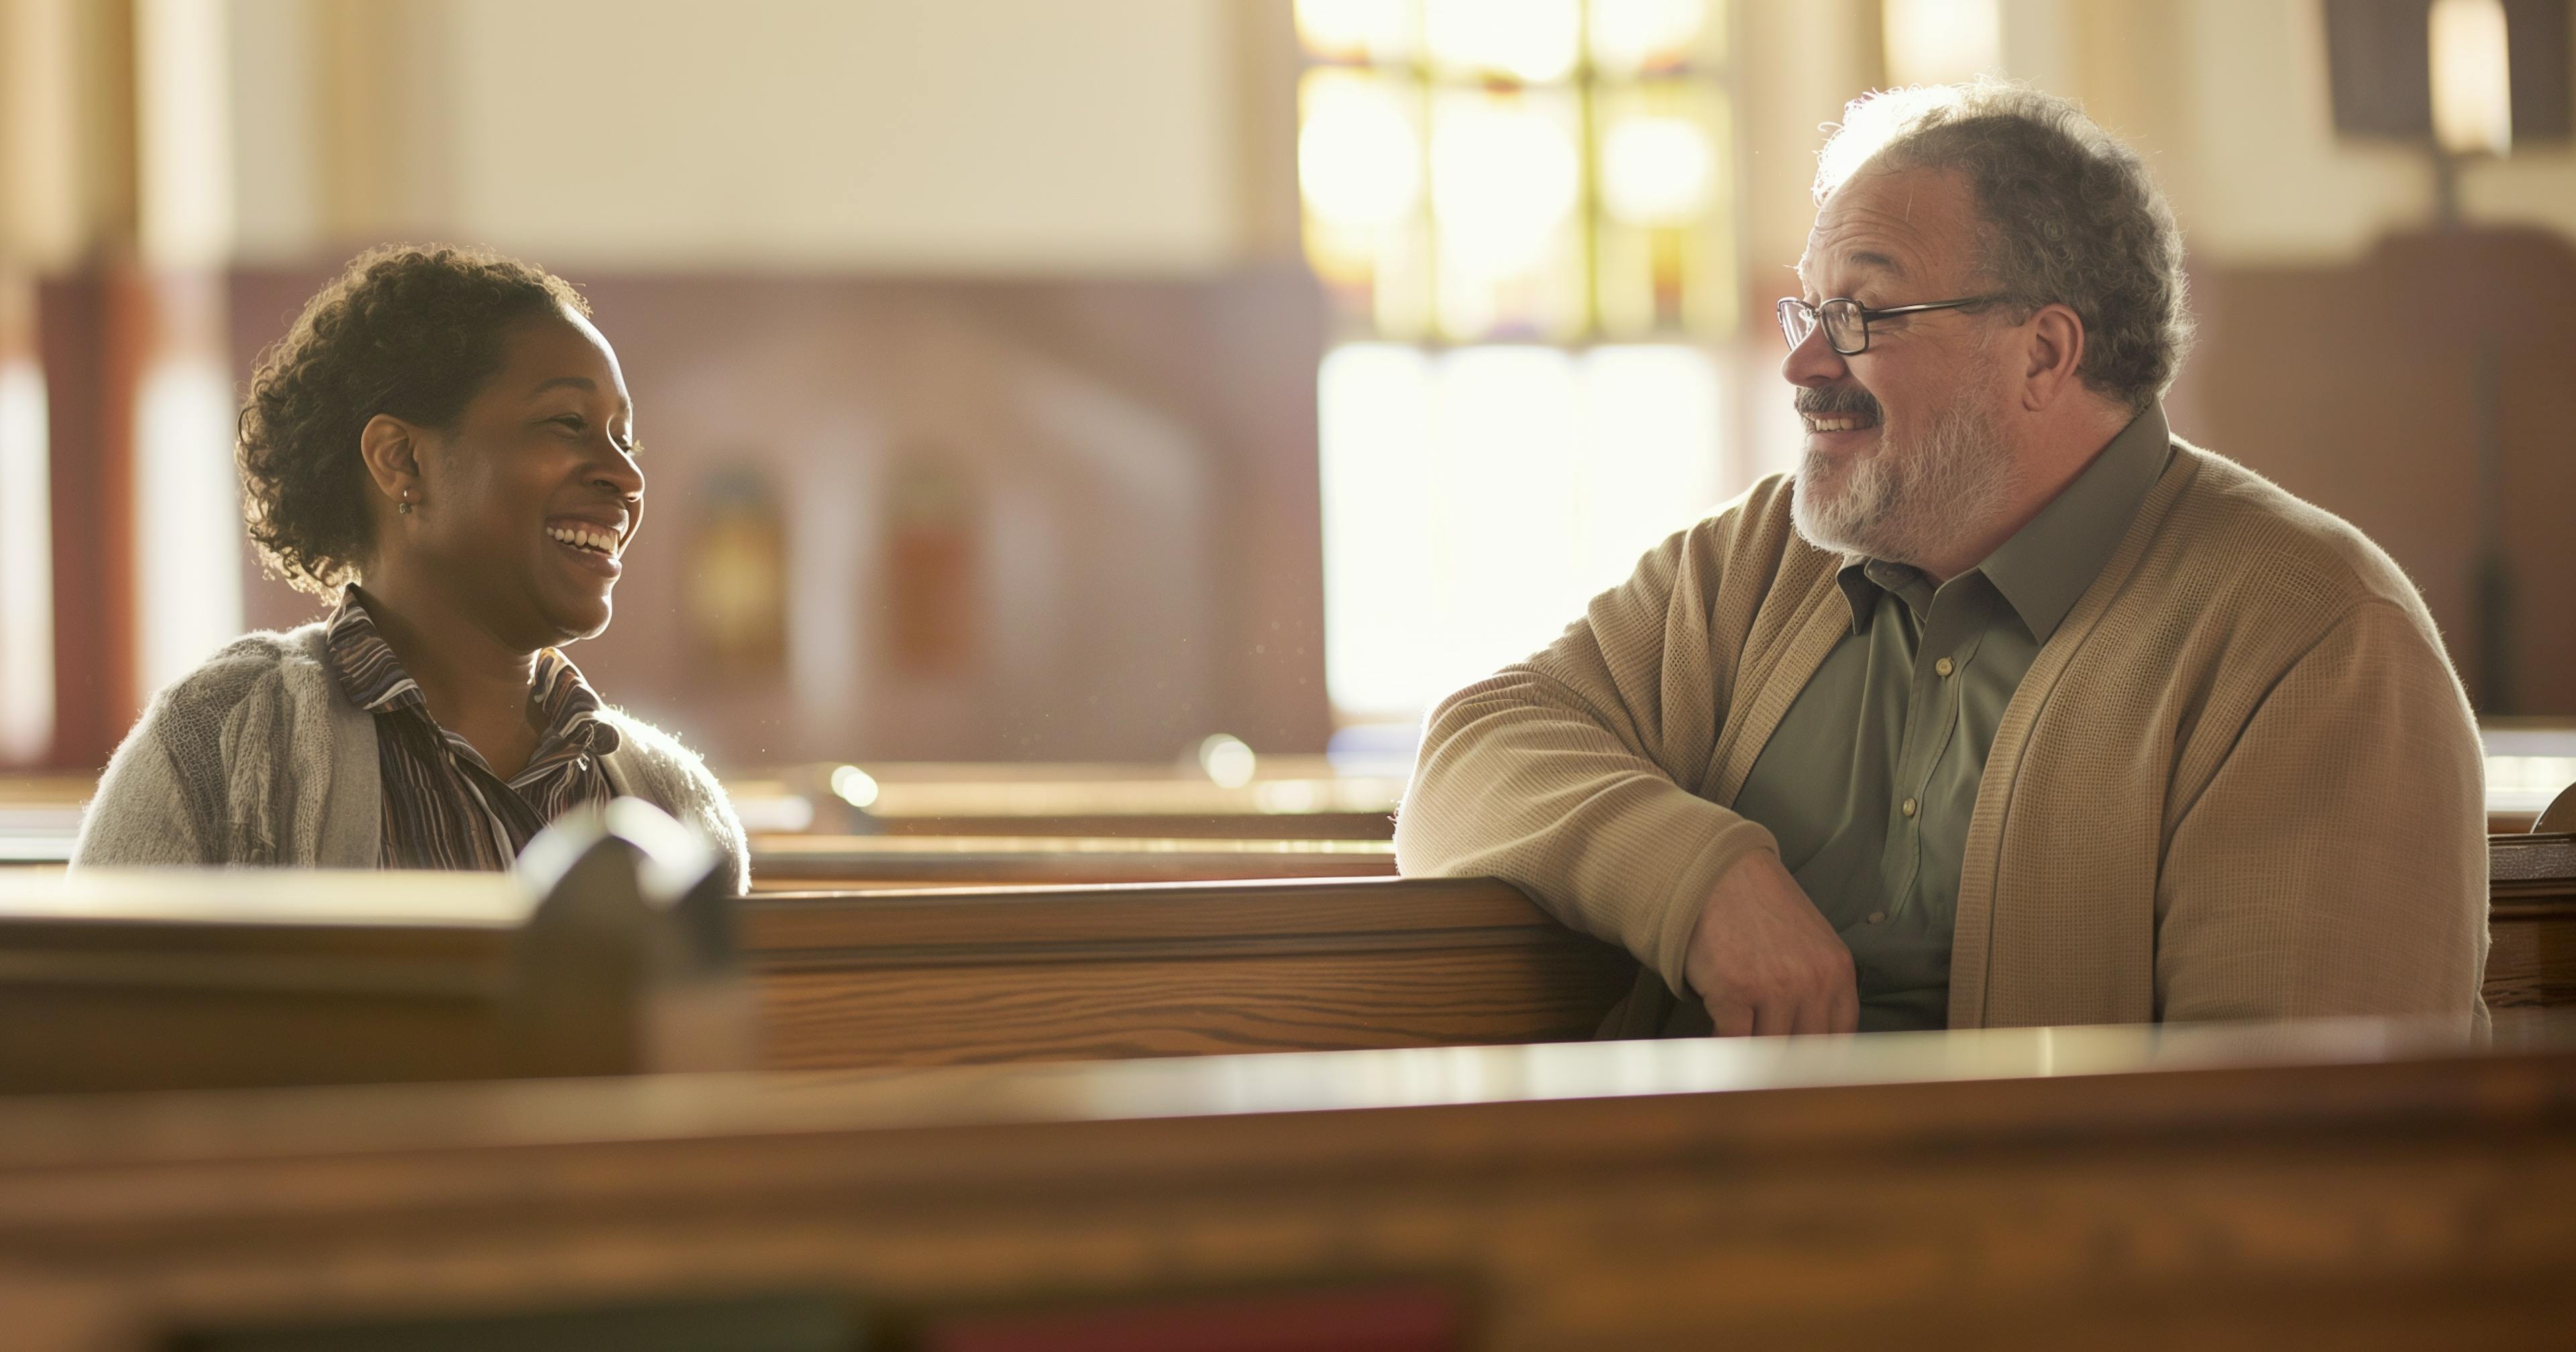 A pastor and a congregant sitting in a pew, smiling and talking.